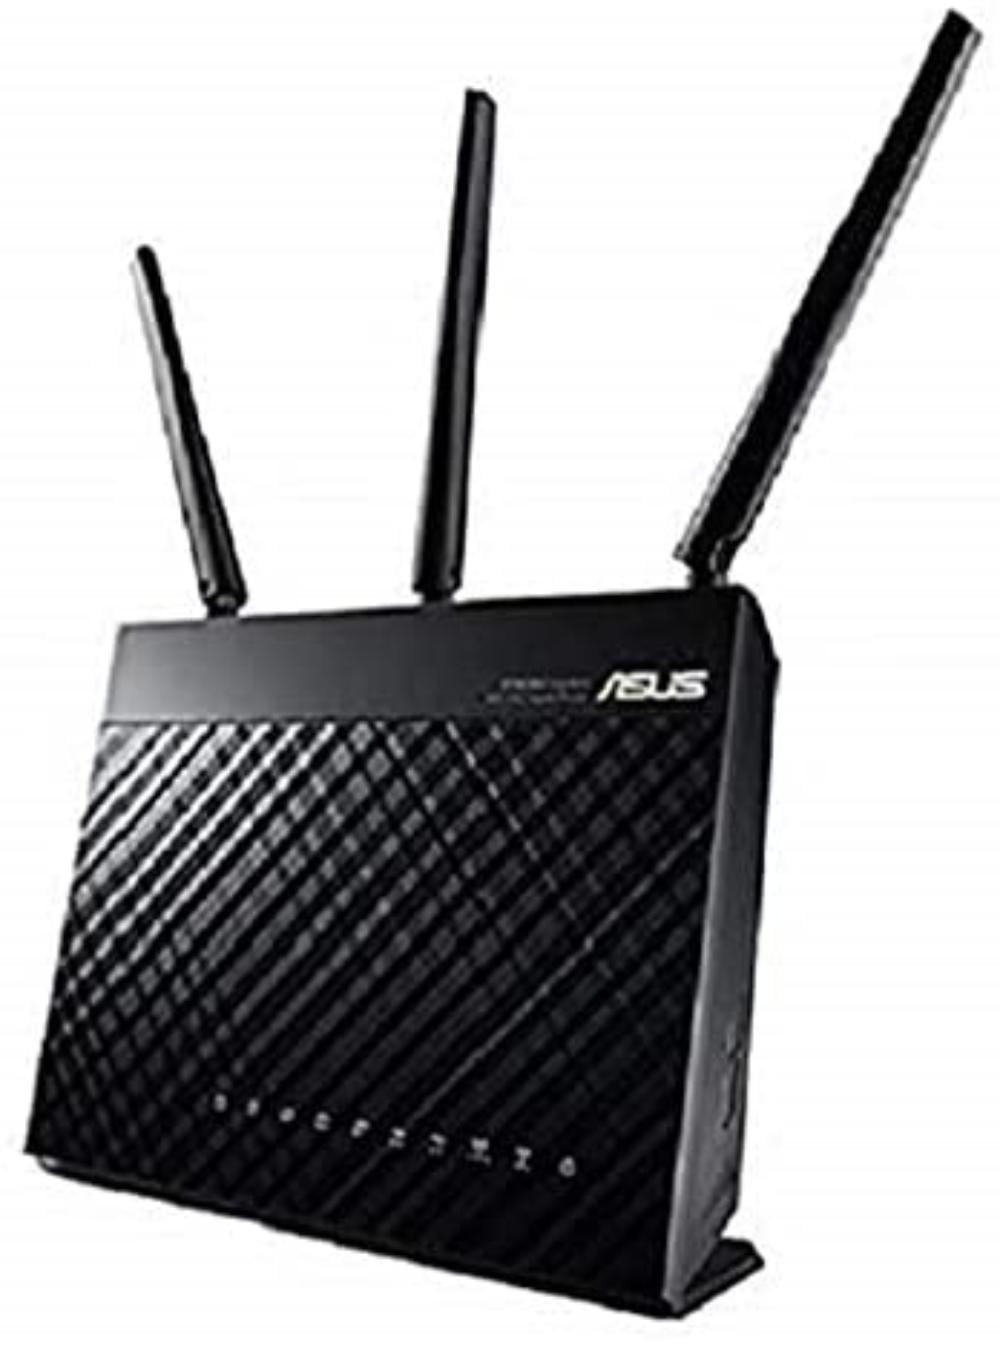 AC1900 for Mesh Wifi System ASUS Whole Home Dual-Band AiMesh Router 